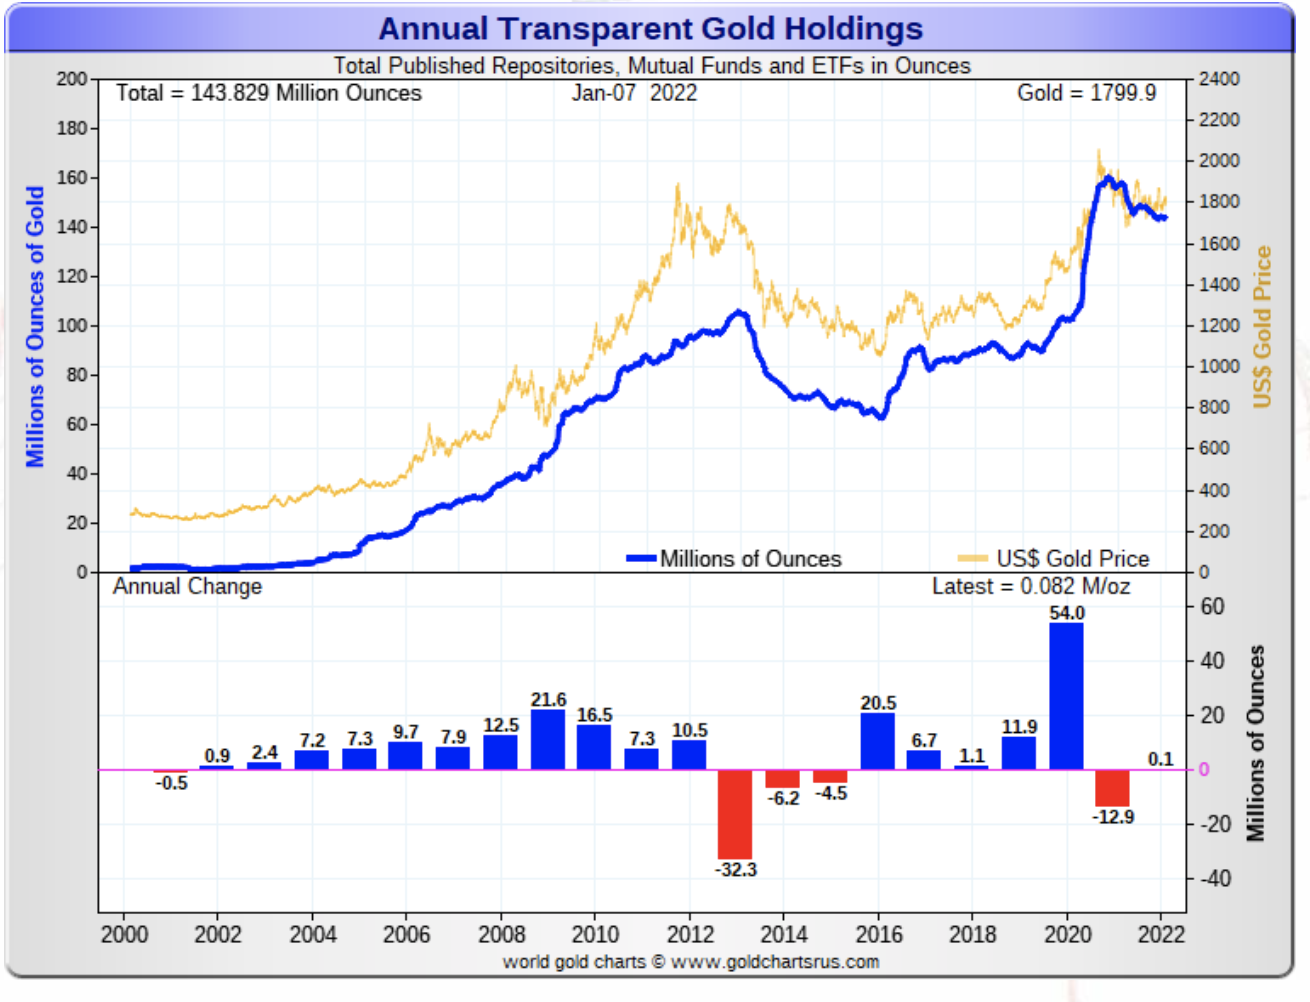 combination line and bar chart showing gold ETF volumes and annual additions or reductions